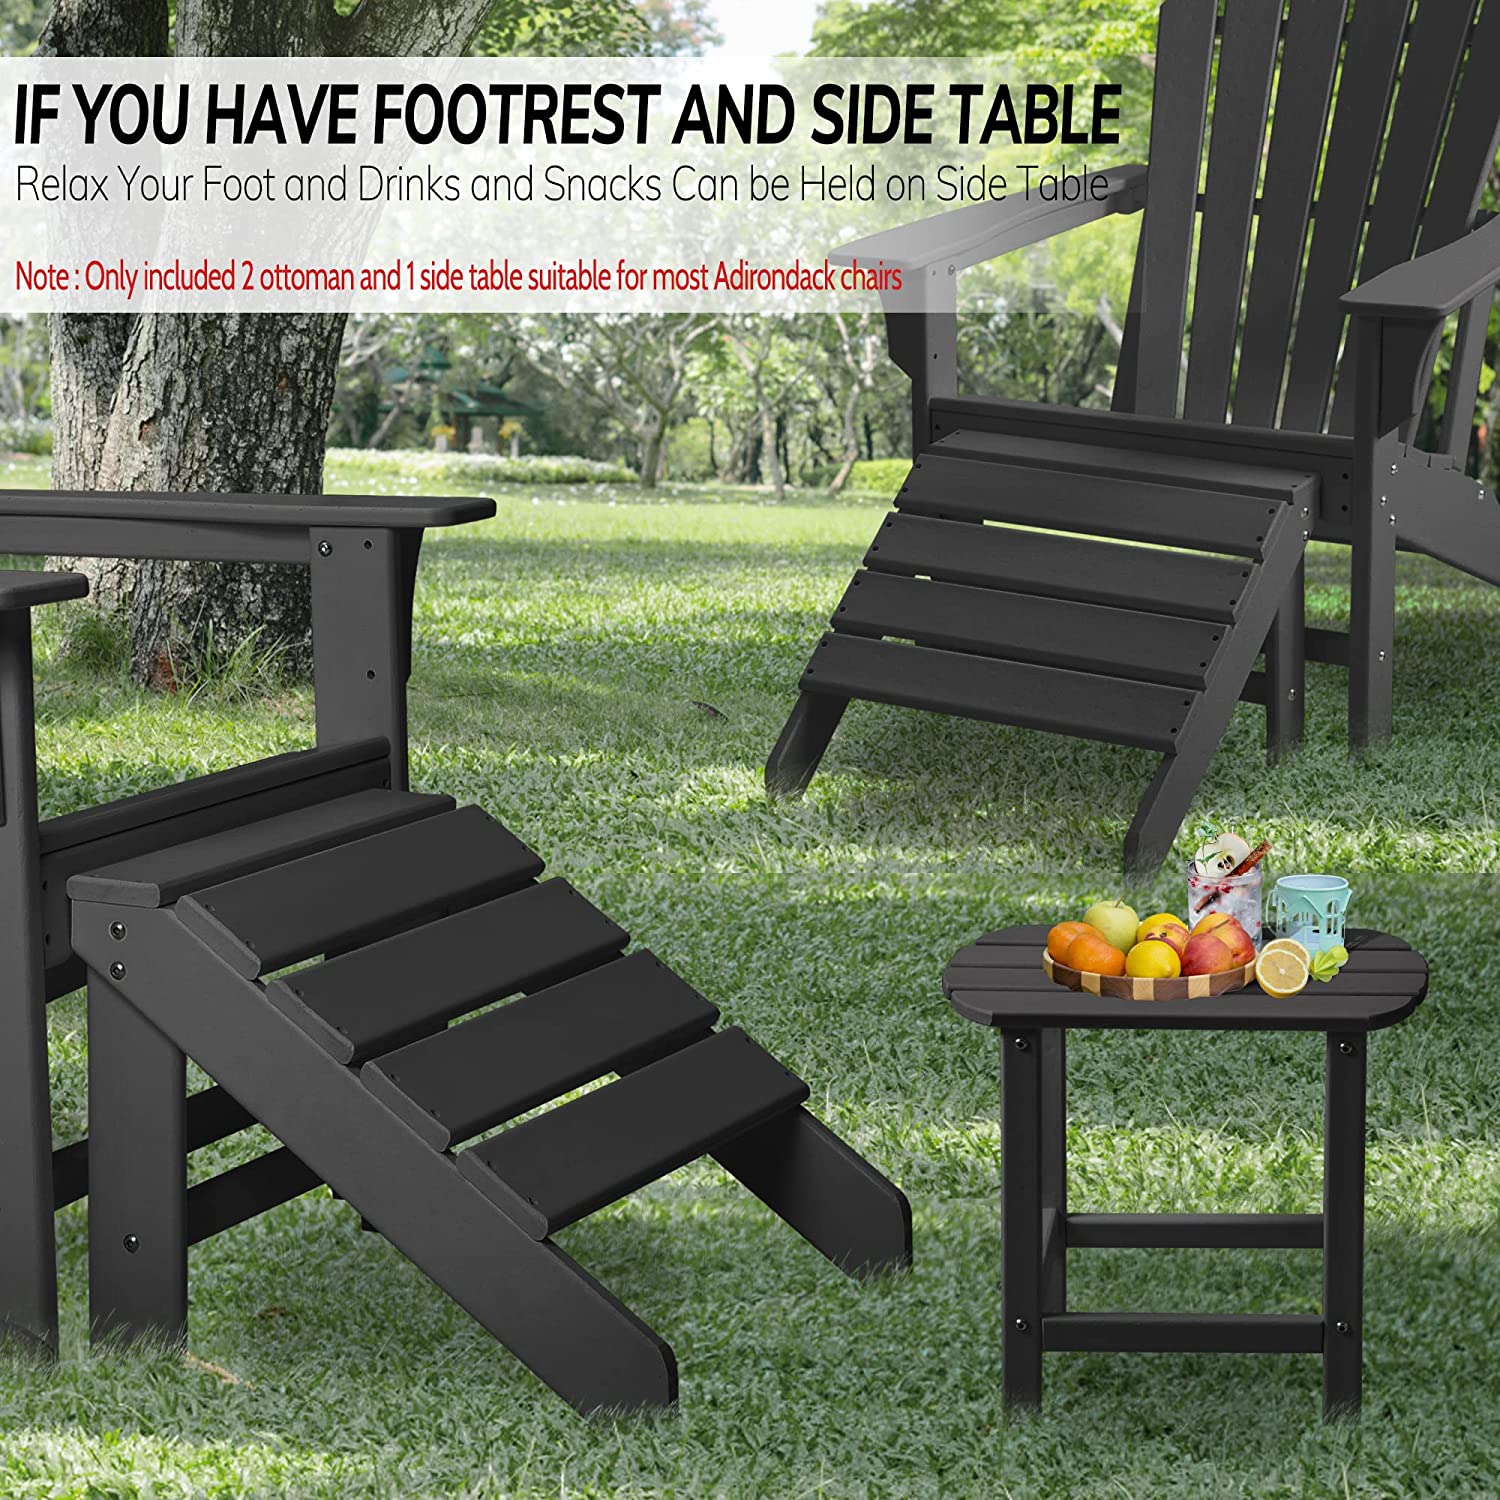 FHFO Adirondack Ottoman and Side Table for Adirondack Chairs, 2 Pieces Outdoor Adirondack Footrest & 1 Piece End Table, Weather Resistant Footstool Table for Adirondack Chair （Black） - image 2 of 5